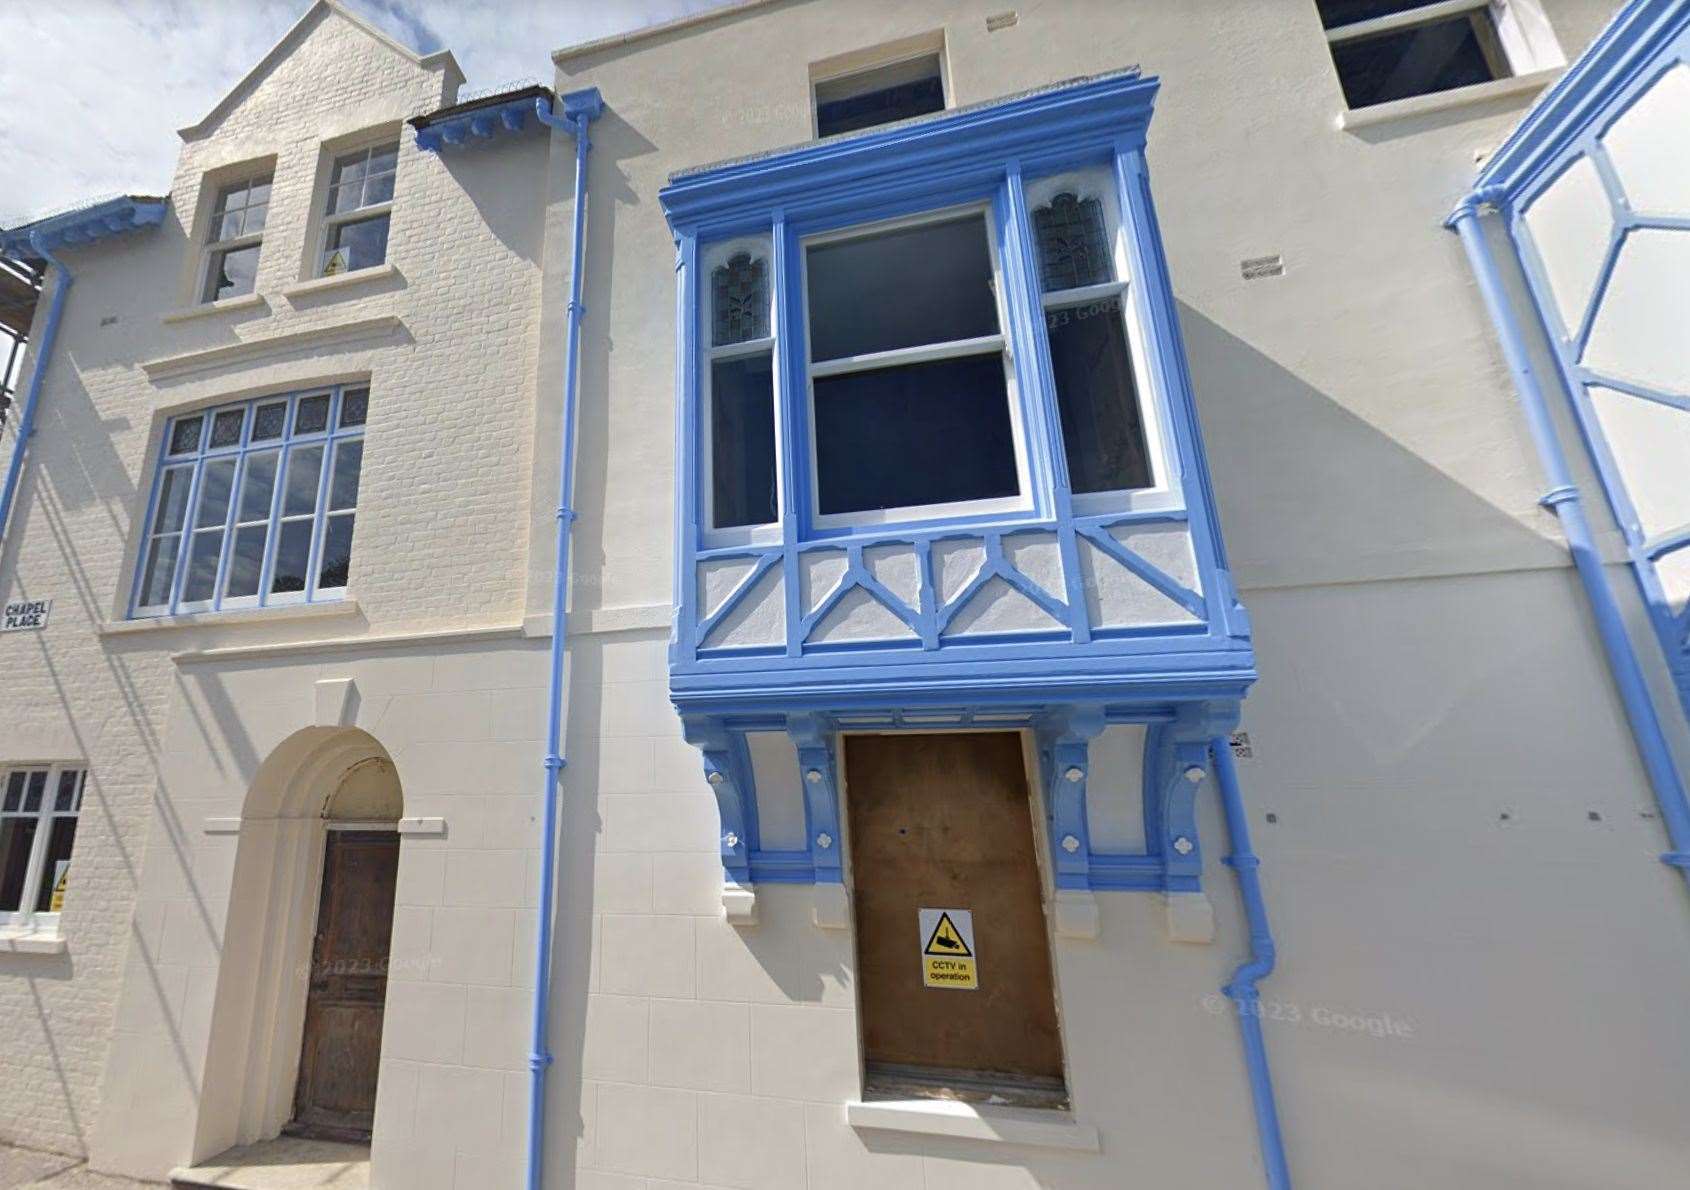 The Ramsgate property, pictured in April this year, has remained empty since the 1980s. Picture: Google